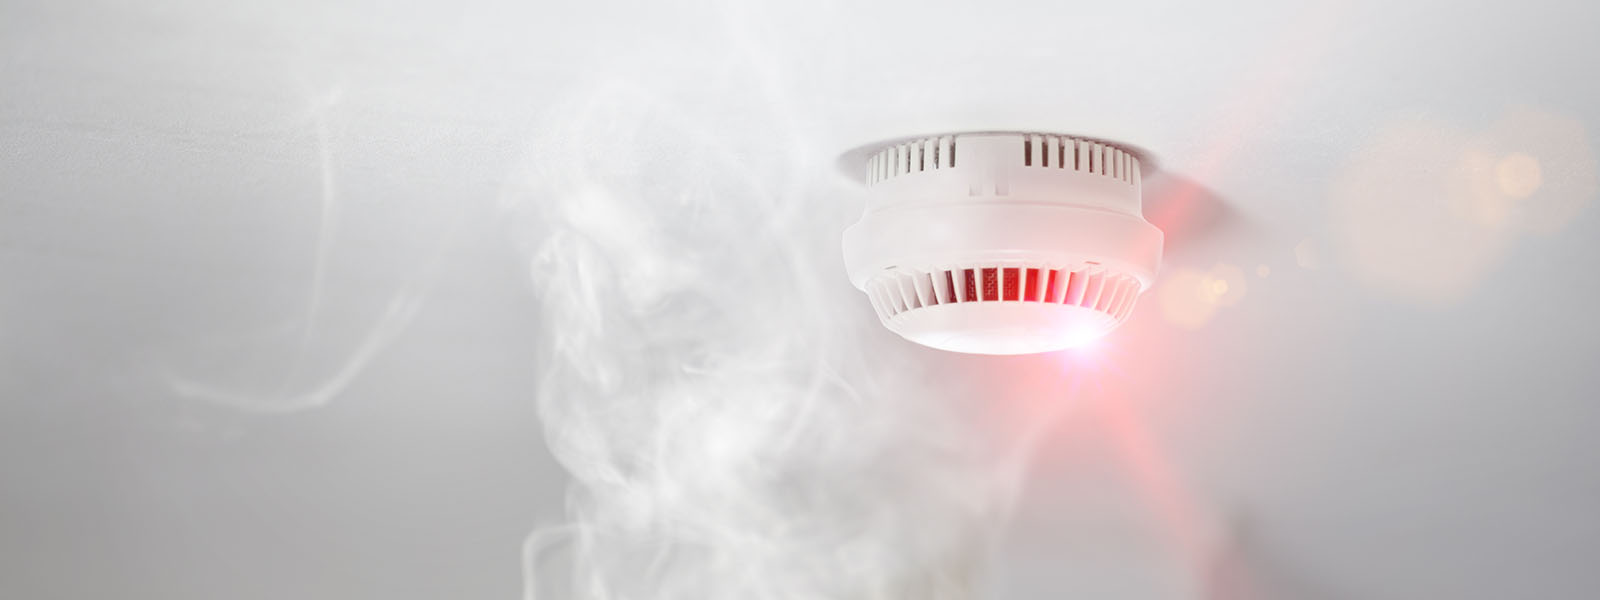 All About Smoke Fire Alarm Installation